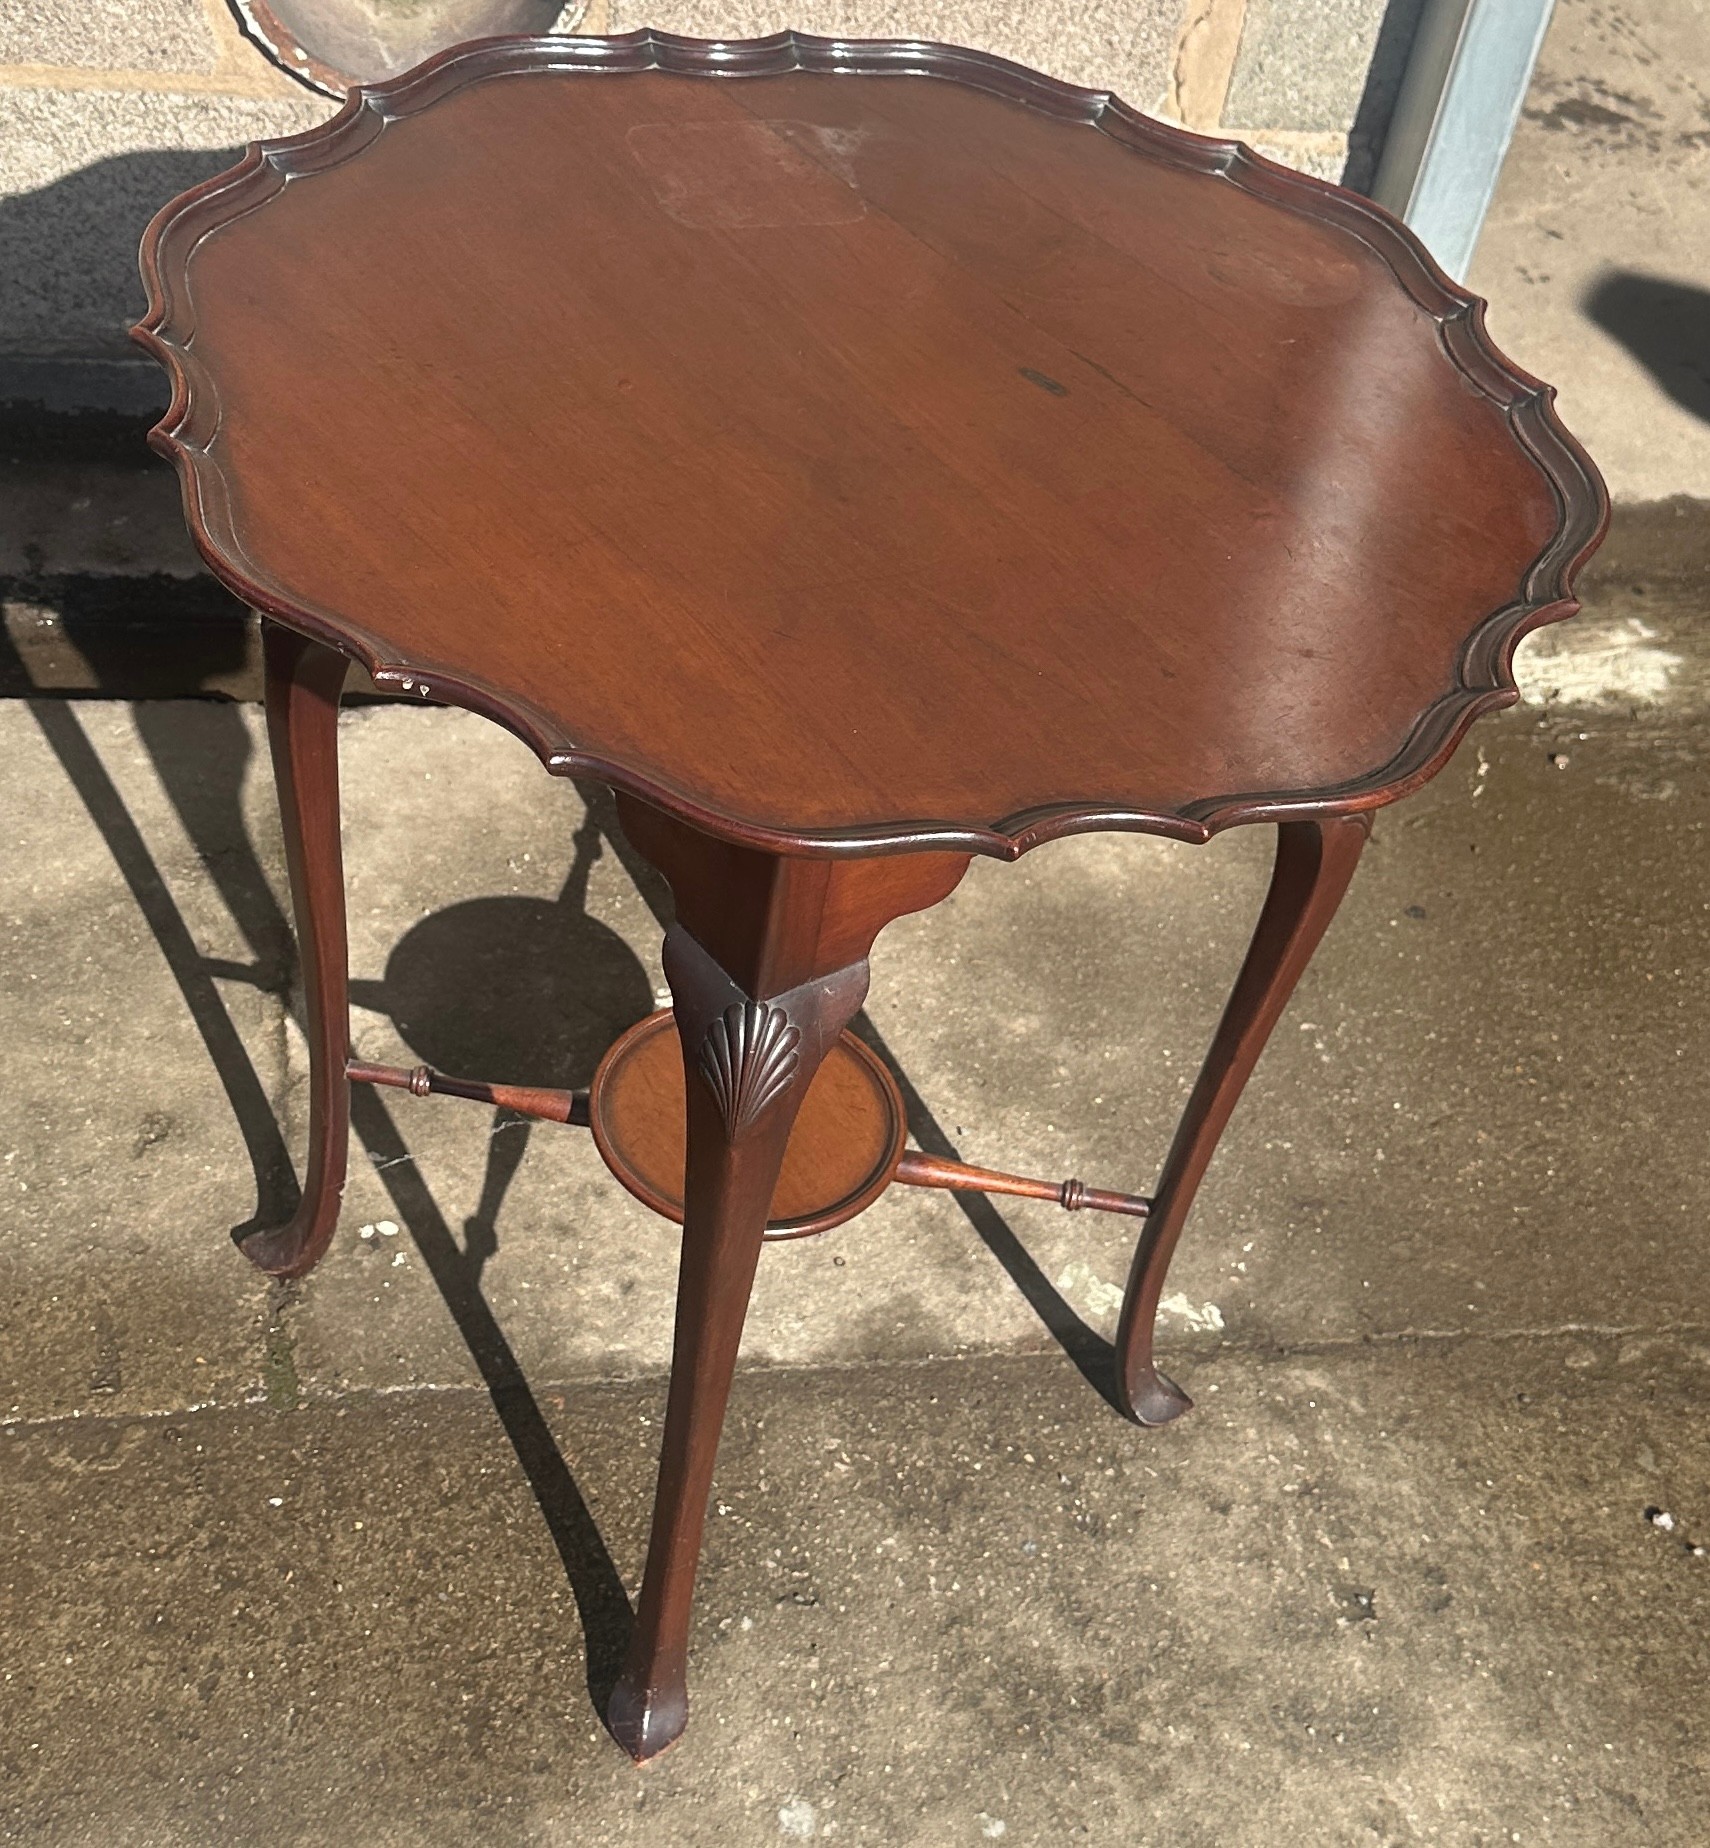 Mahogany occasional table measures approx 27 inches tall by 25 diameter - Image 3 of 4